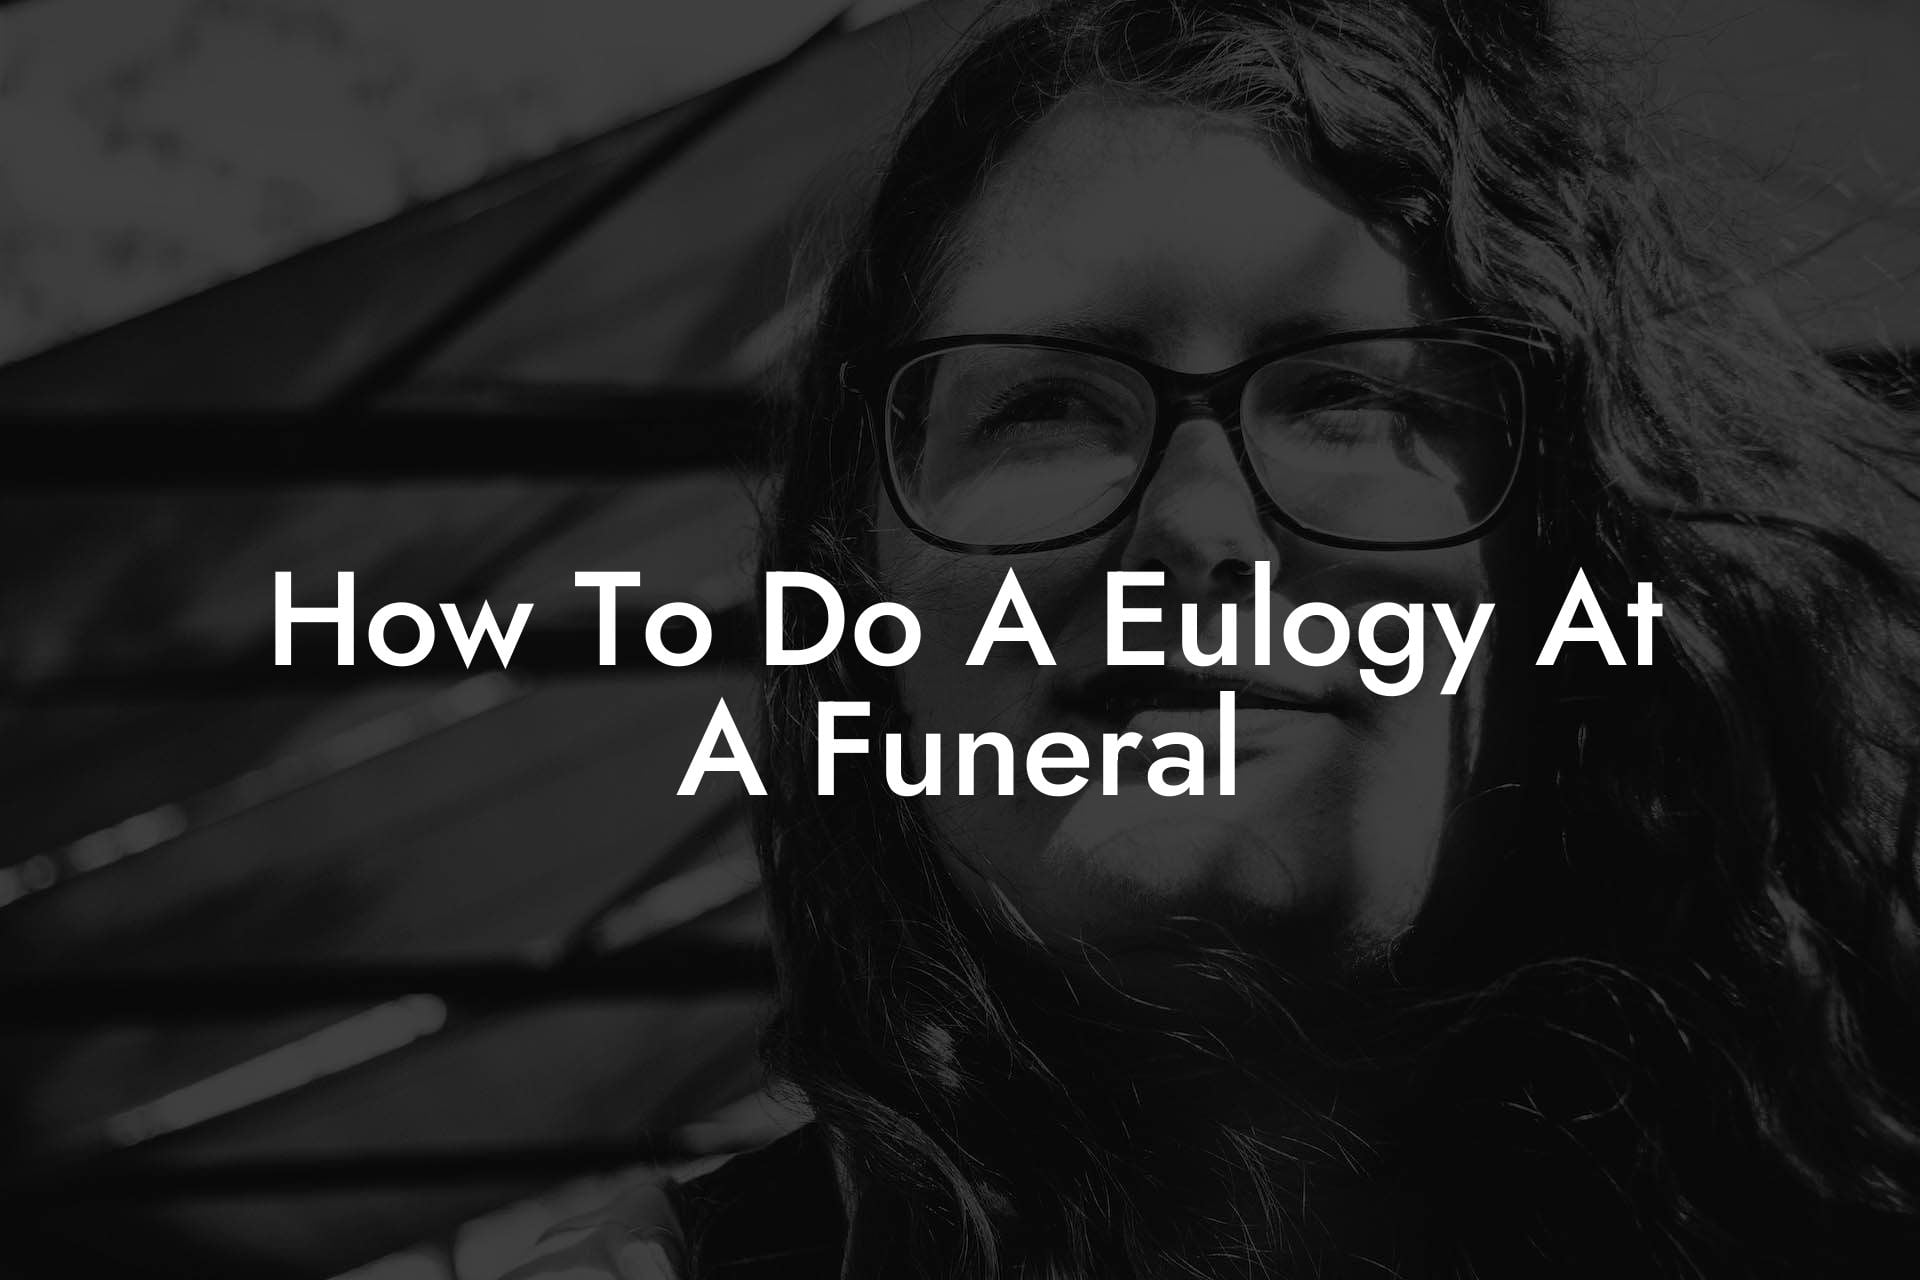 How To Do A Eulogy At A Funeral